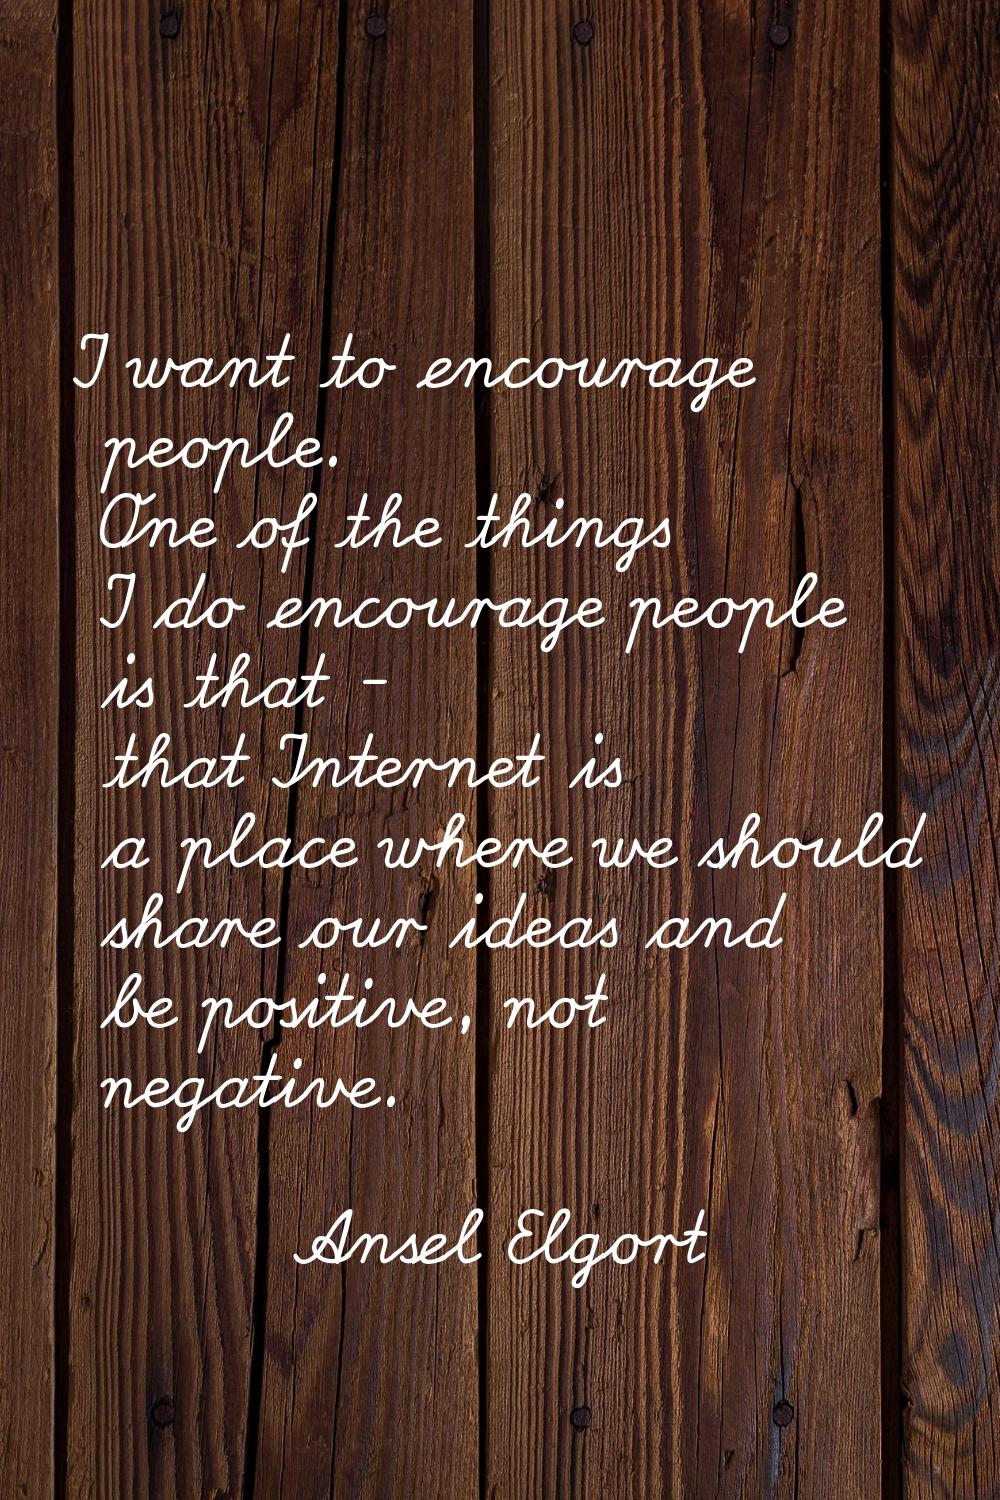 I want to encourage people. One of the things I do encourage people is that - that Internet is a pl